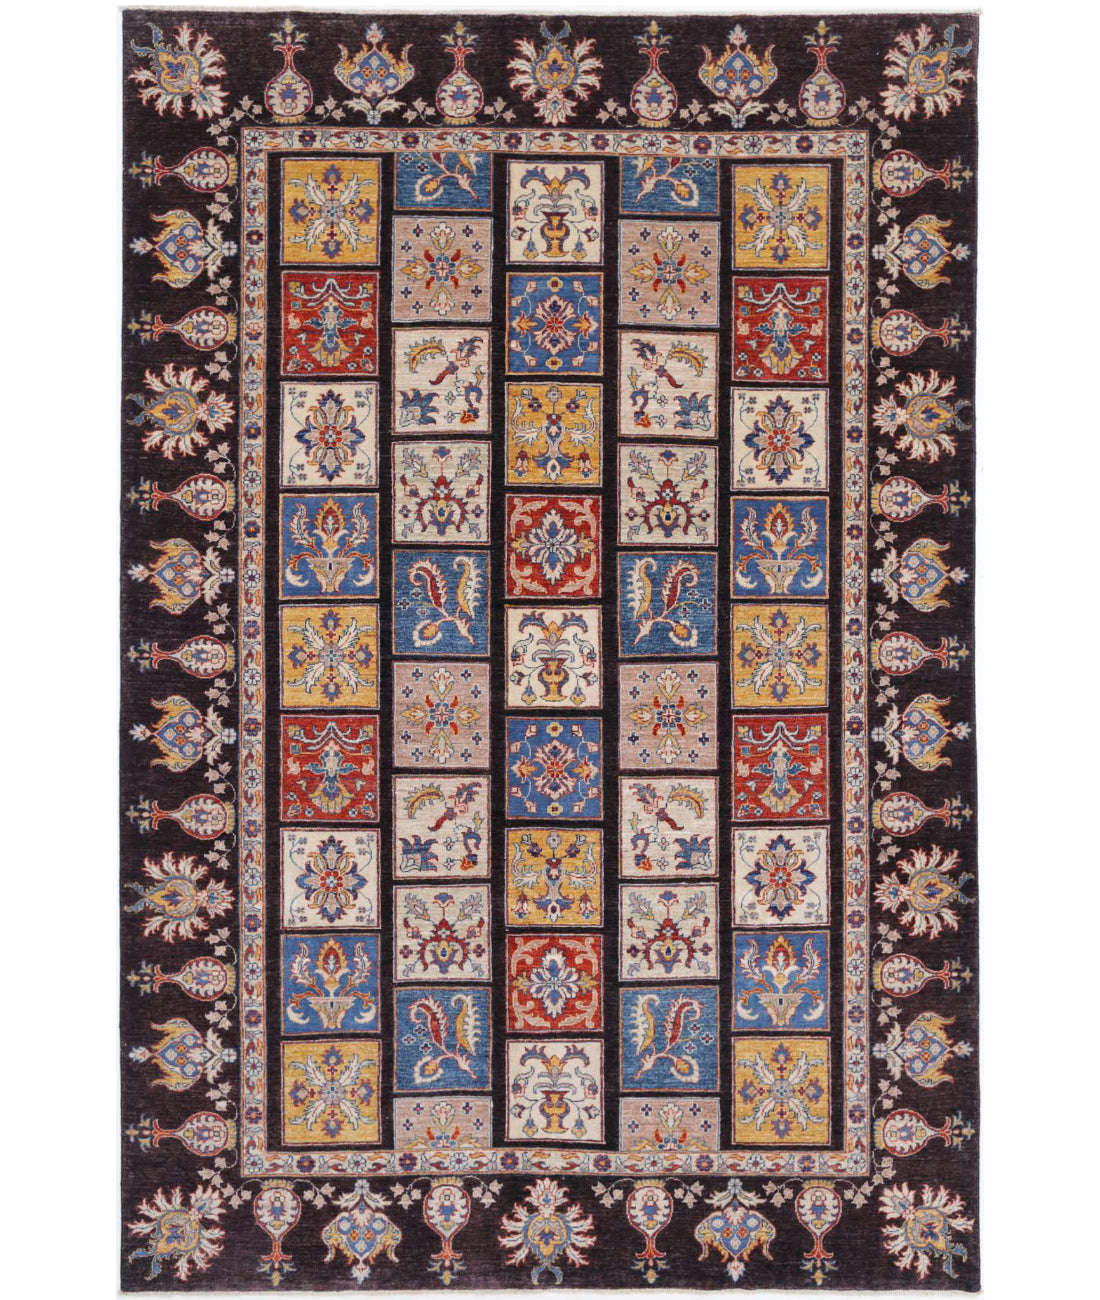 Hand Knotted Bakhtiari Wool Rug - 6'5'' x 9'8'' 6'5'' x 9'8'' (193 X 290) / Brown / Blue